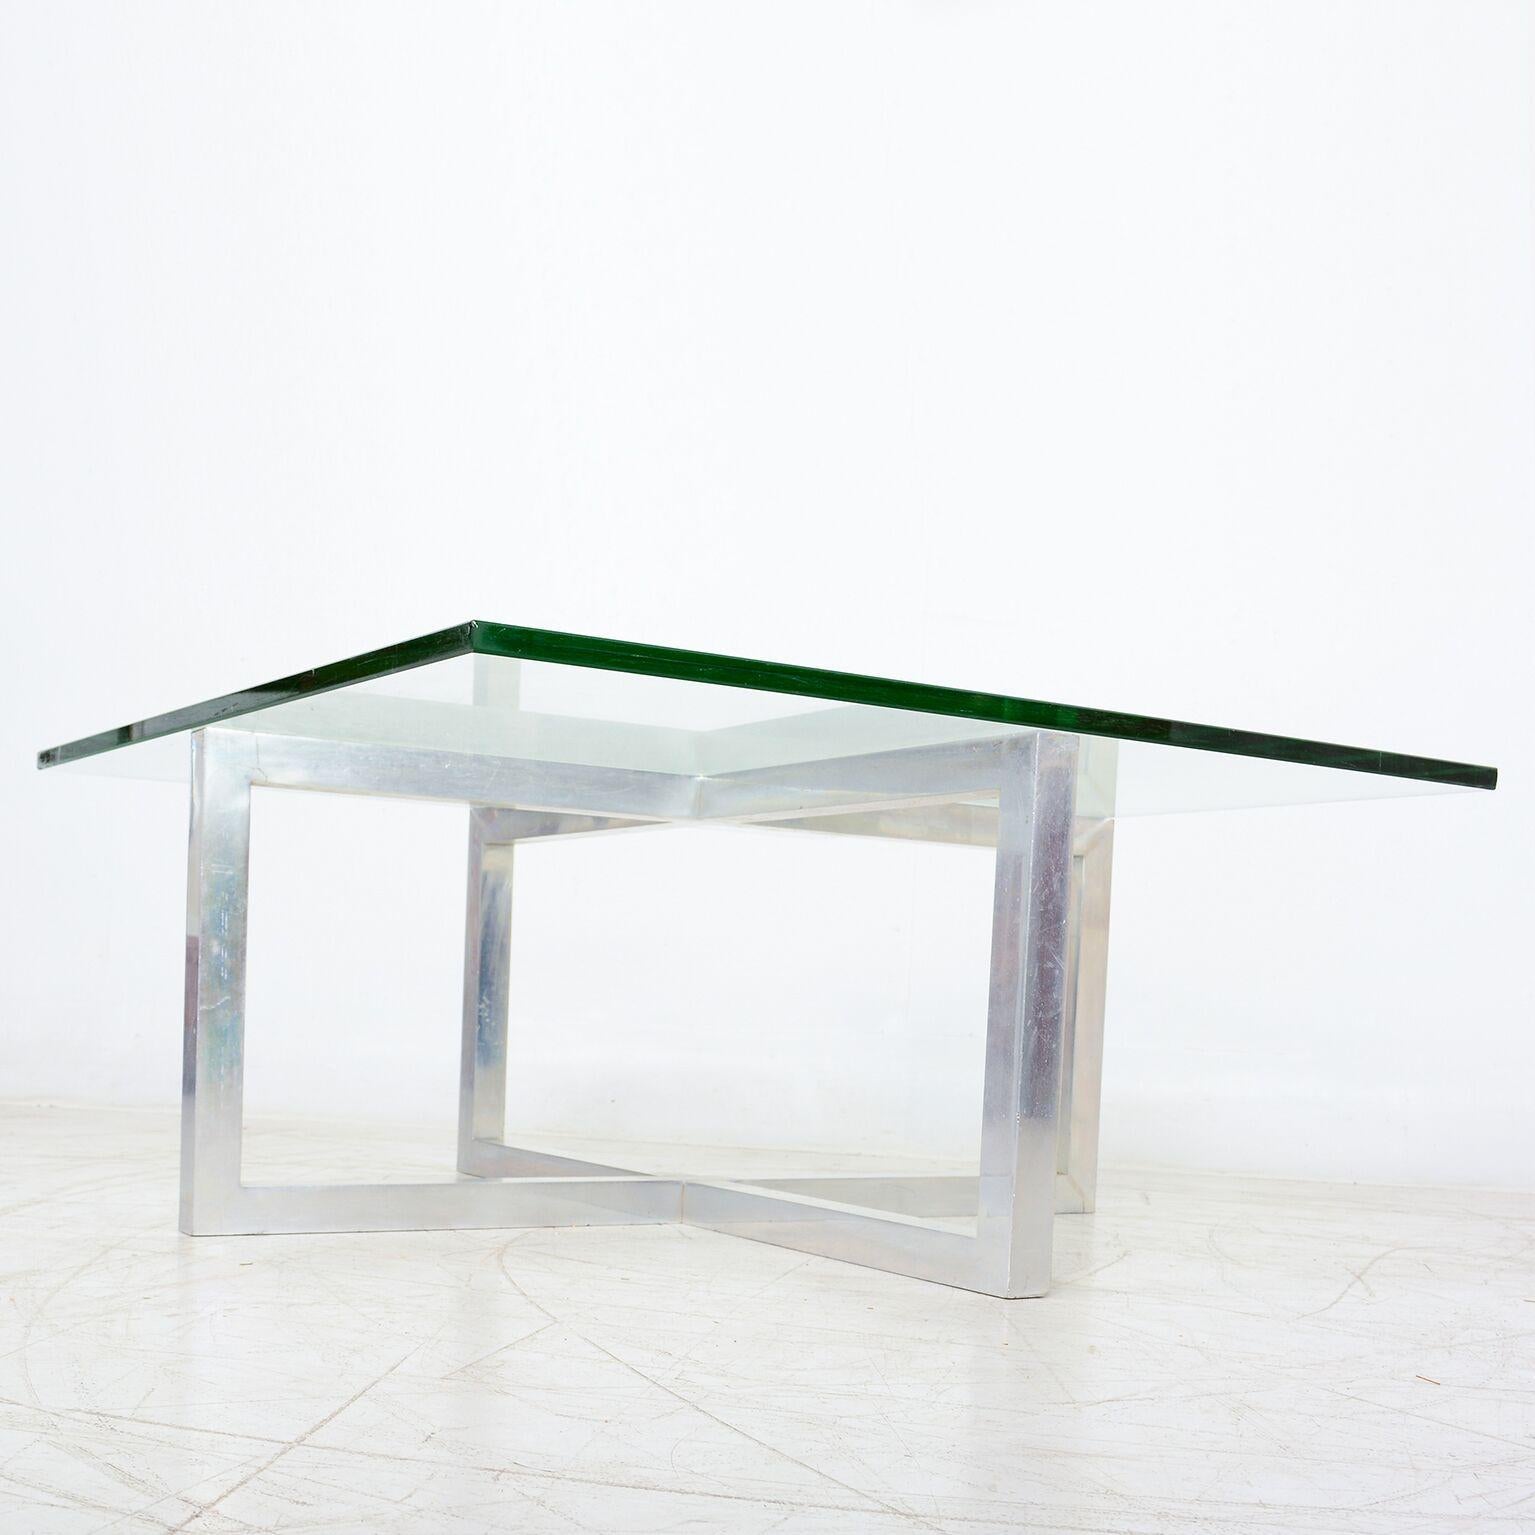 Coffee Table
Vintage Modern Coffee Table in the style of Paul Mayen. USA circa 1970s.
Unmarked.  Aluminum frame and Glass Top.
Dimensions: 36 x 36 X 16 H
Aluminum X frame is solid and sturdy. Aluminum polished. Original glass with light scuffs on